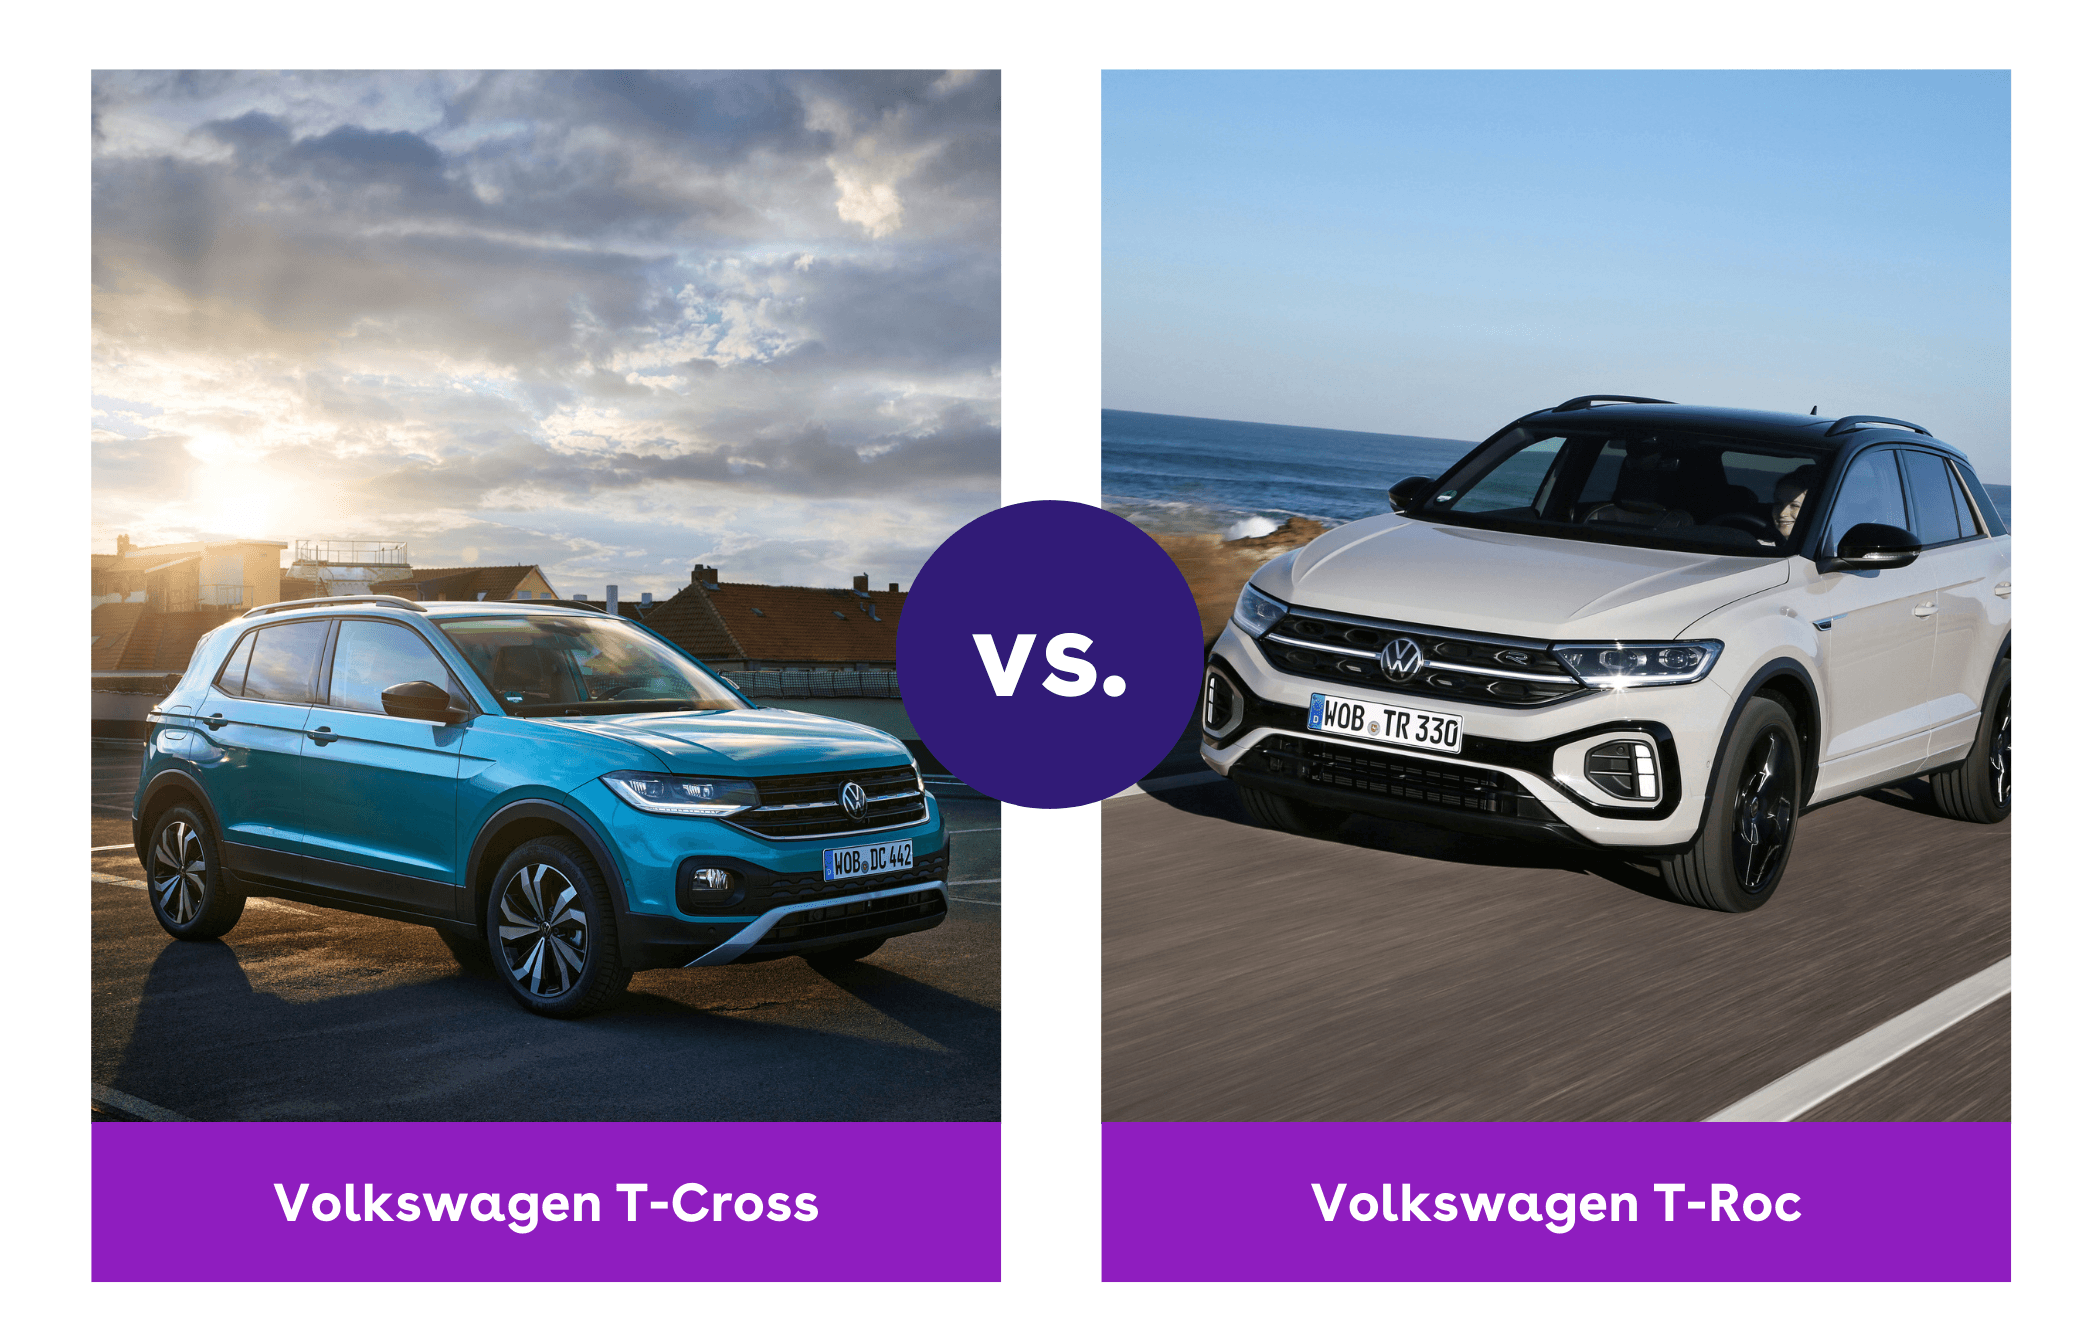 a versus image between a vw t-cross and t-roc